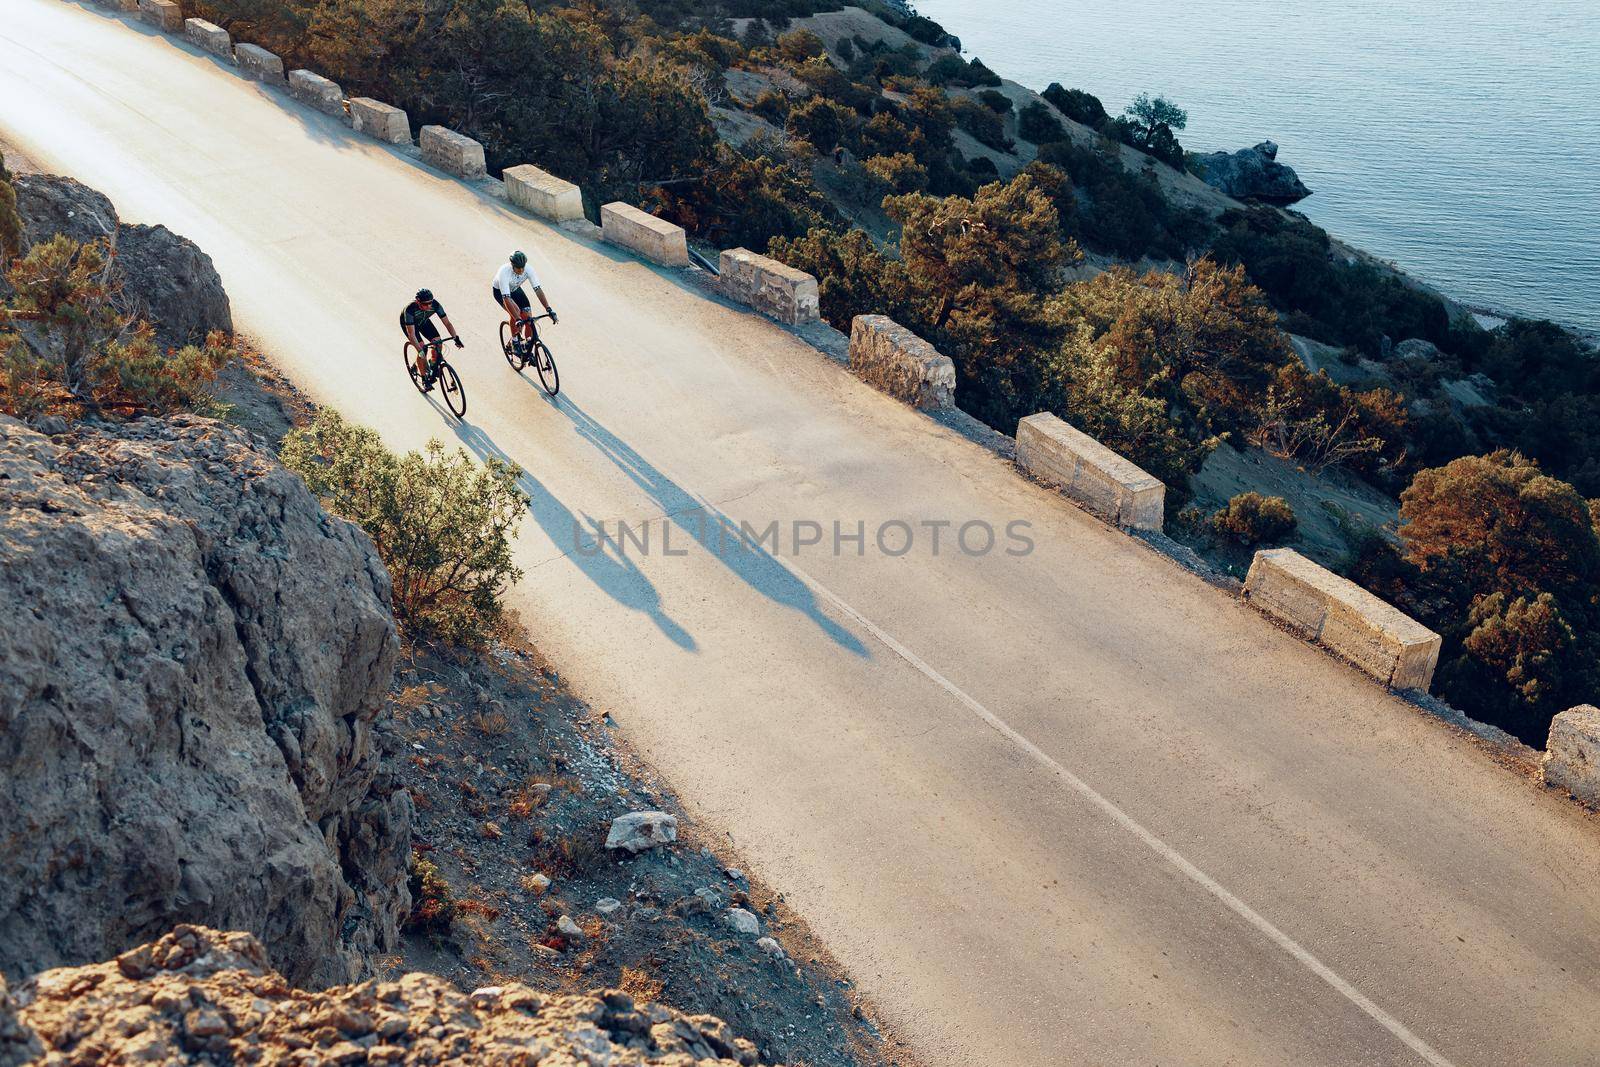 Two professional male cyclists riding their racing bicycles in the morning together on coastal road